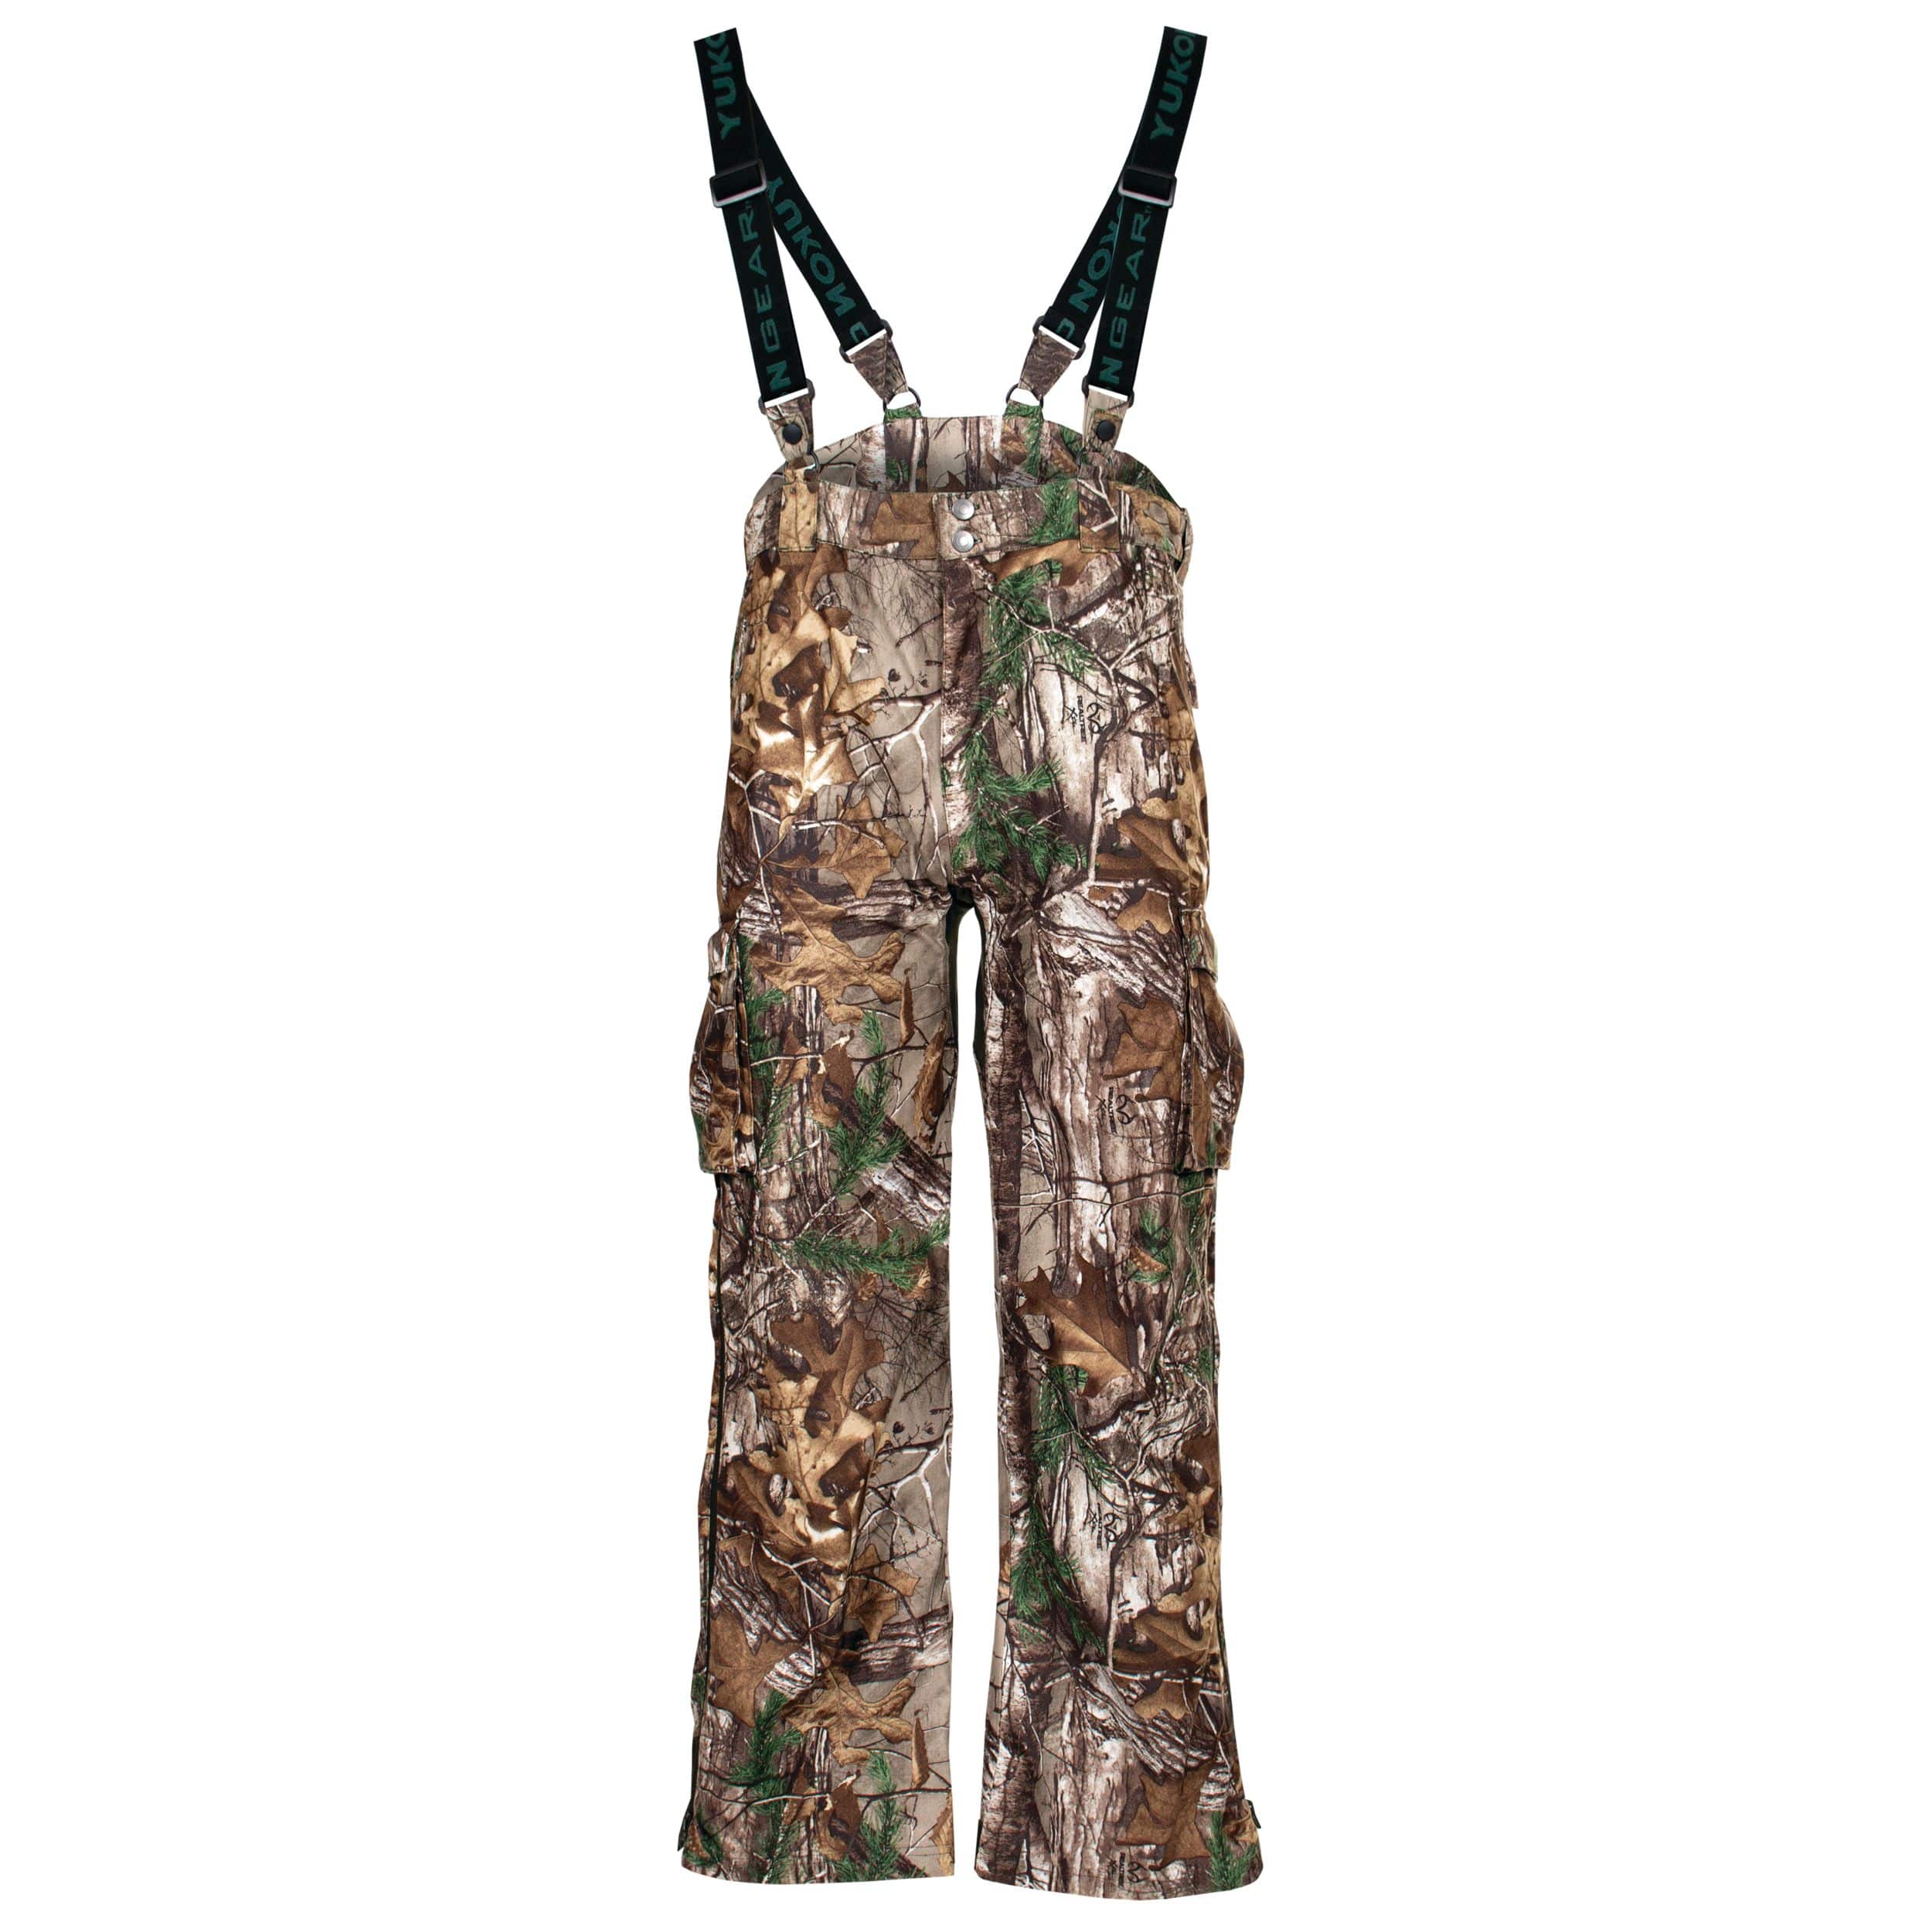 https://media-www.canadiantire.ca/product/playing/hunting/hunting-apparel-footwear/1759644/mens-lightweight-pant-m-23a4fbe4-4690-417a-b4dc-f233edfd858a-jpgrendition.jpg